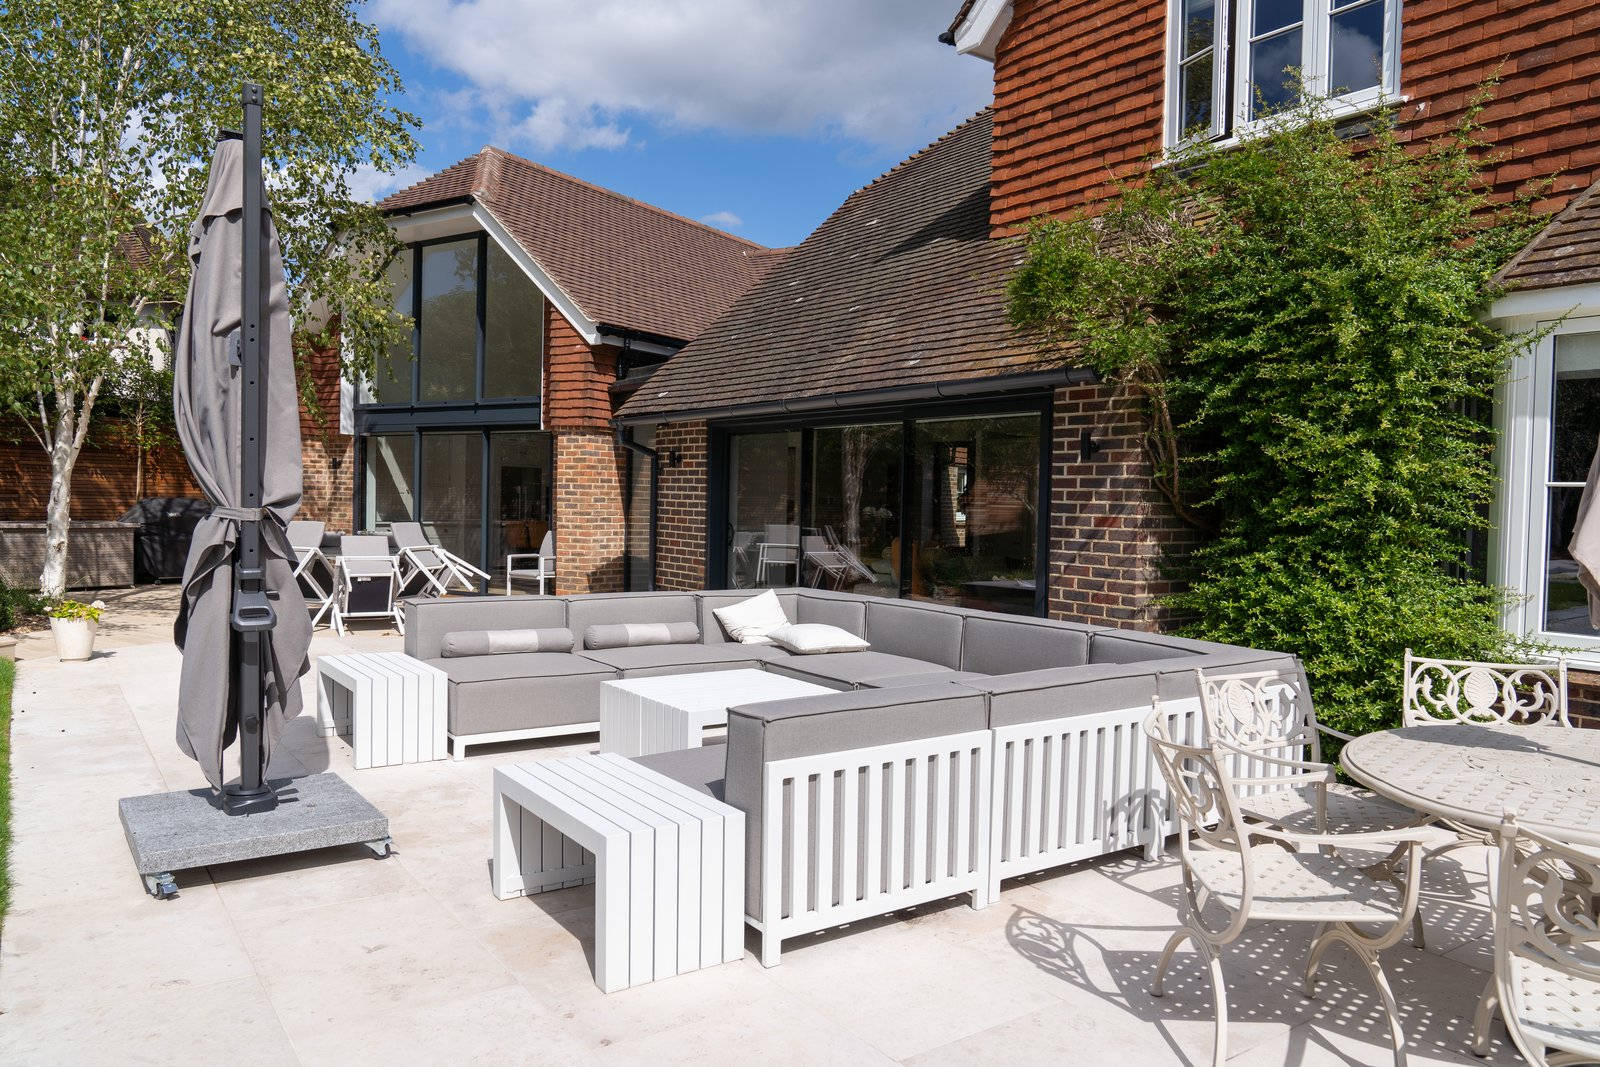 Photograph of Garage New Build Patio Seating Area